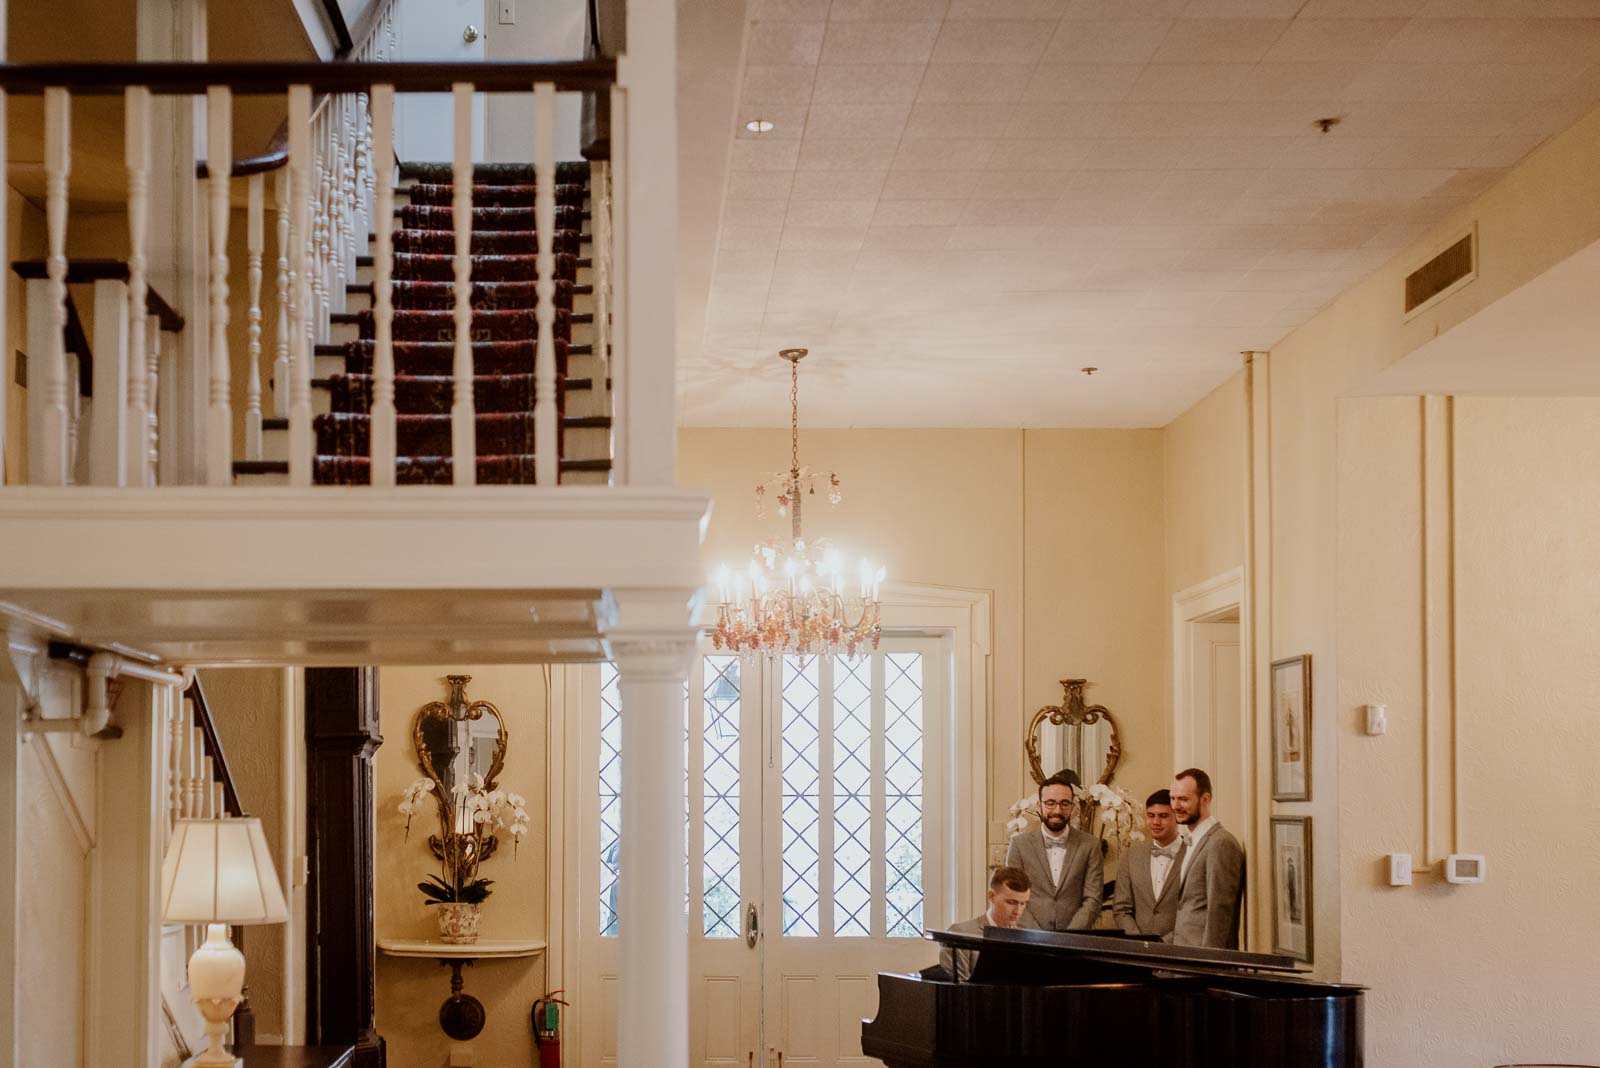 A wide shot of the stairwell coming down with the eye leading to the room playing the piano